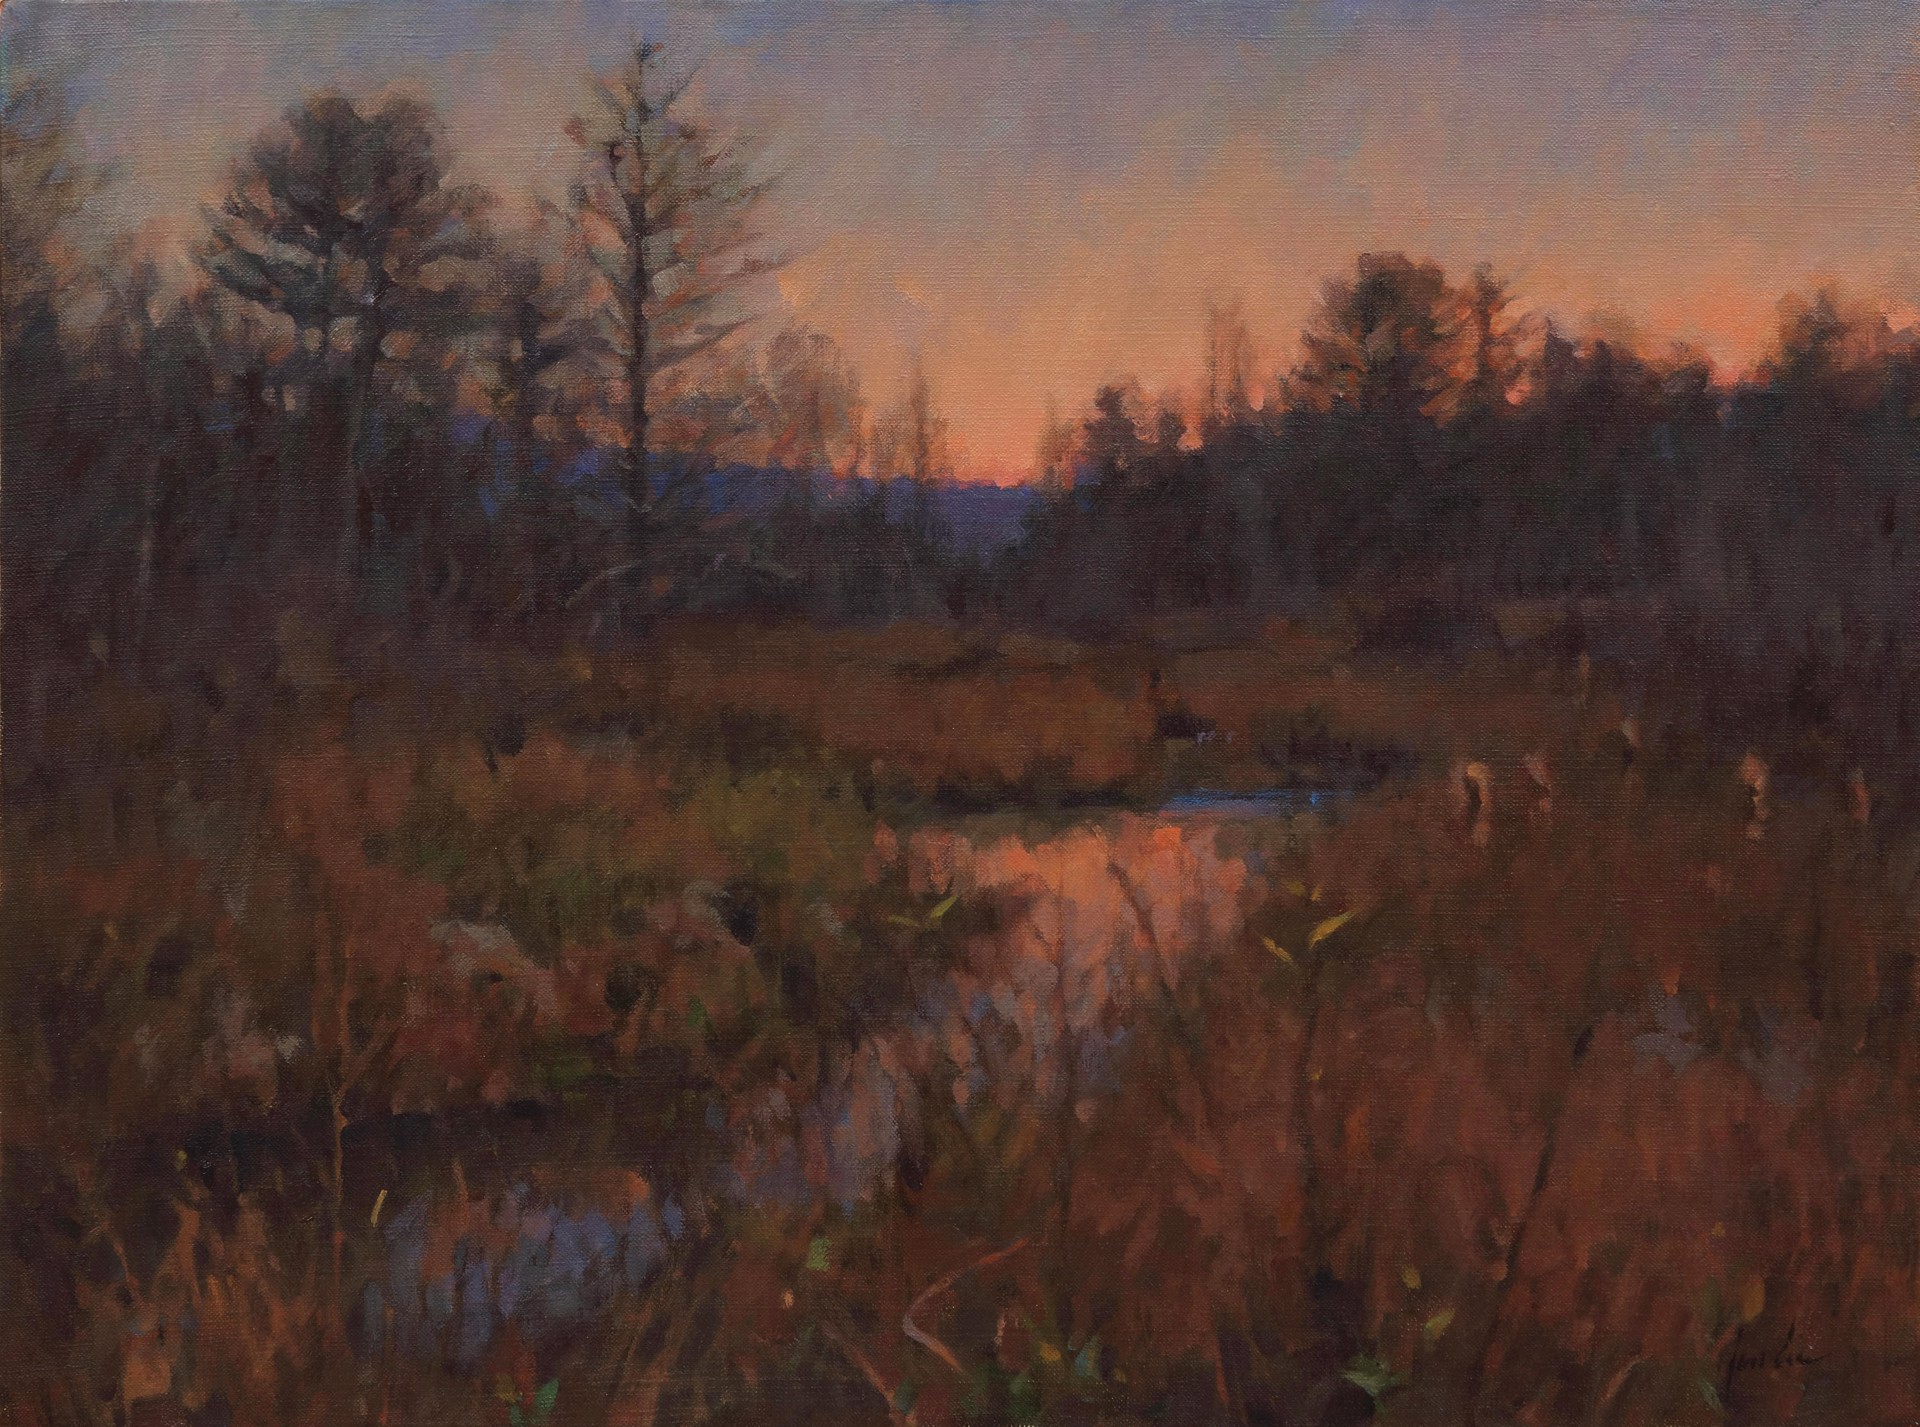 Vermont Afterglow by James Coe